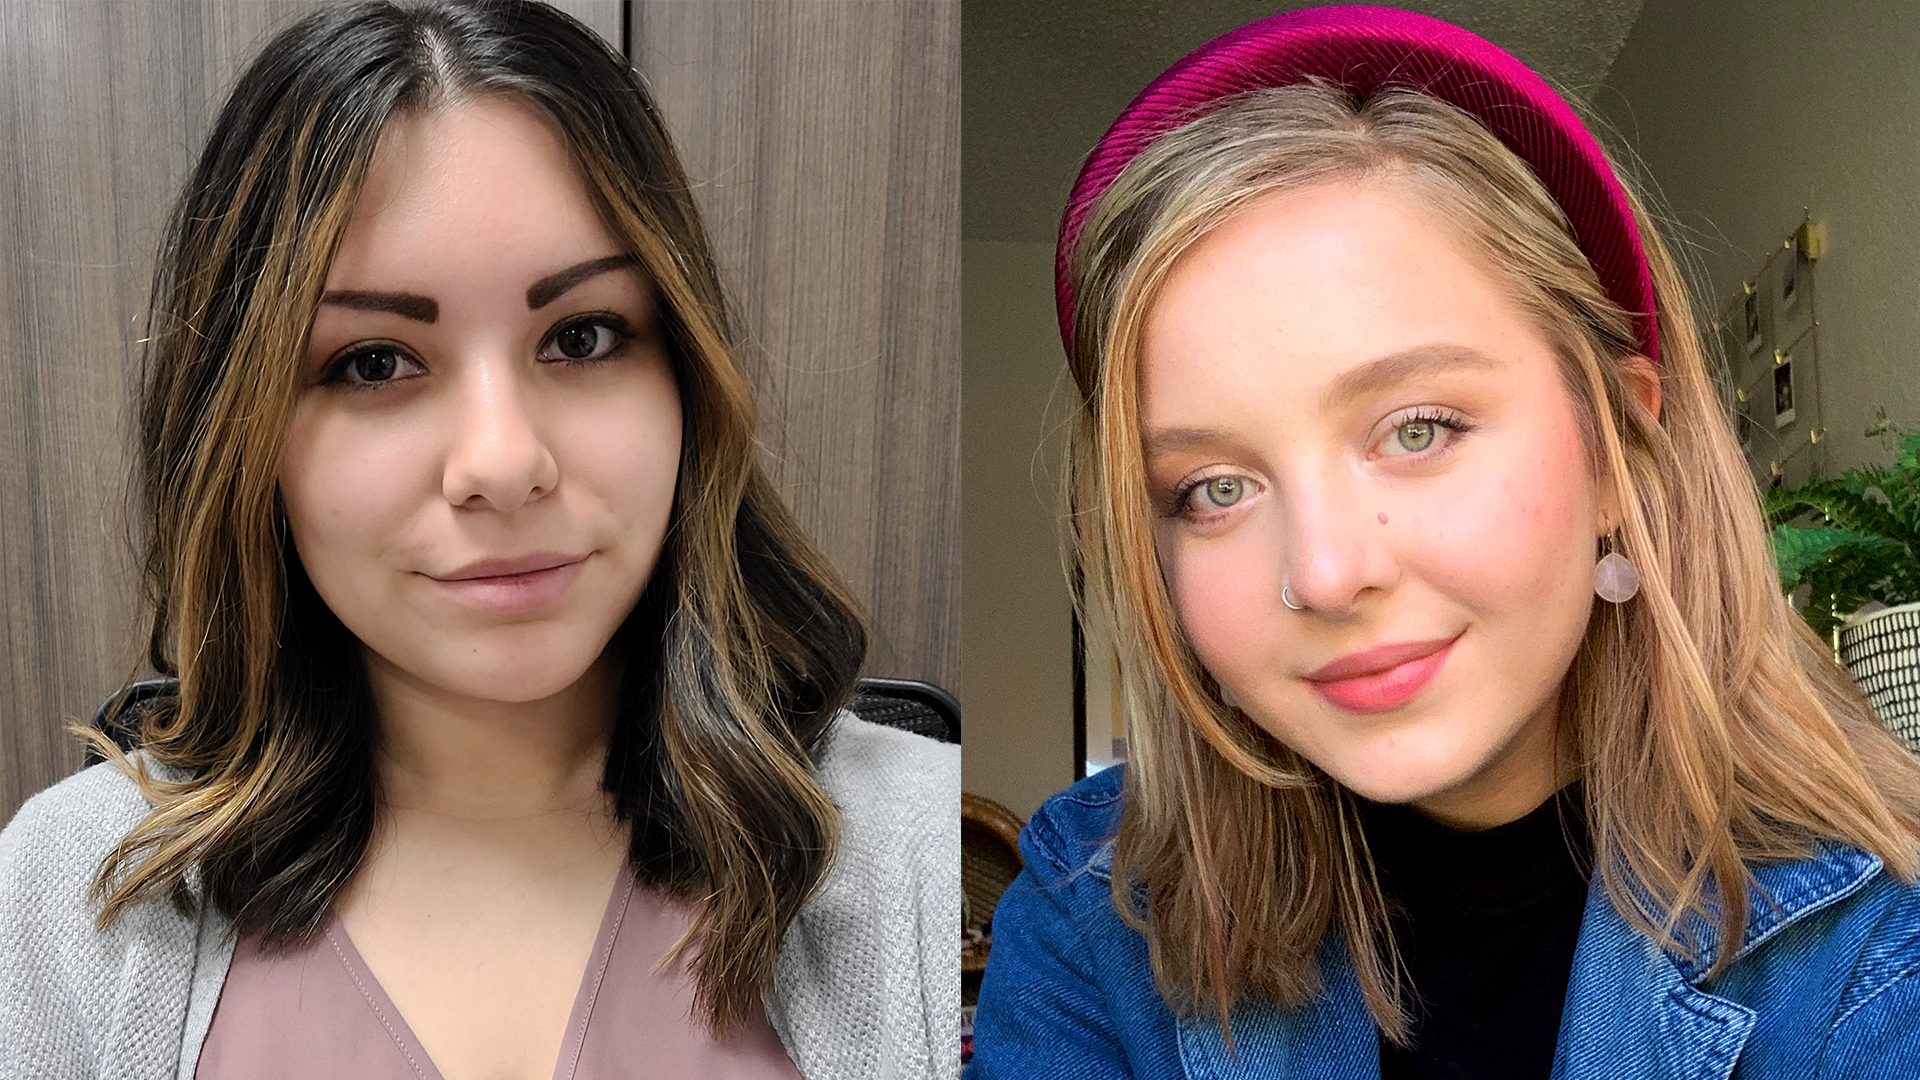 two headshots of women side by side, one with dark brown hair and the other with blonde hair and a thick headband